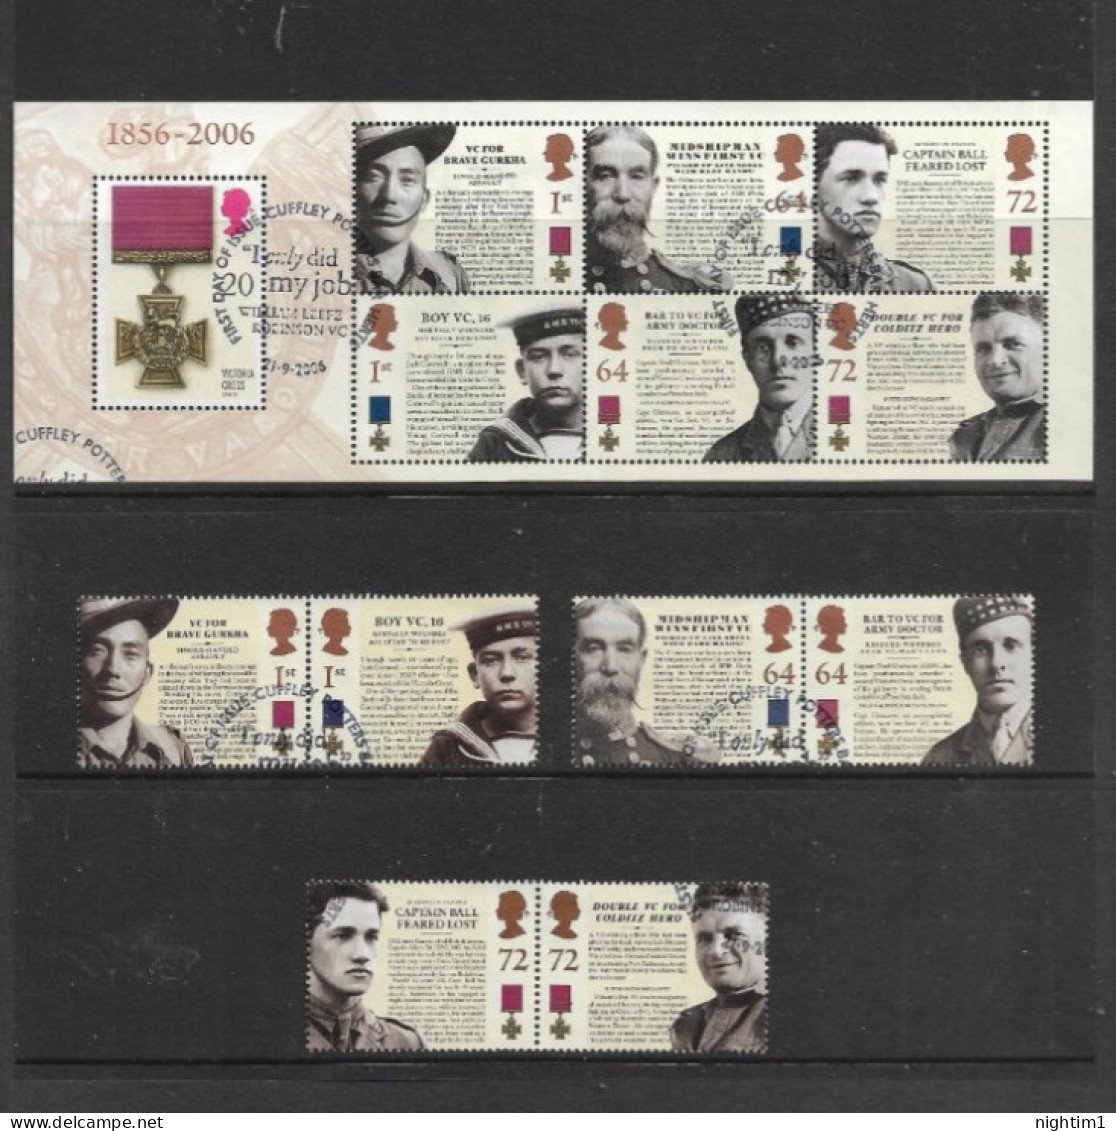 GREAT BRITAIN COLLECTION. VICTORIA CROSS SET OF 6 AND SOUVENIR SHEET. USED. - Usados